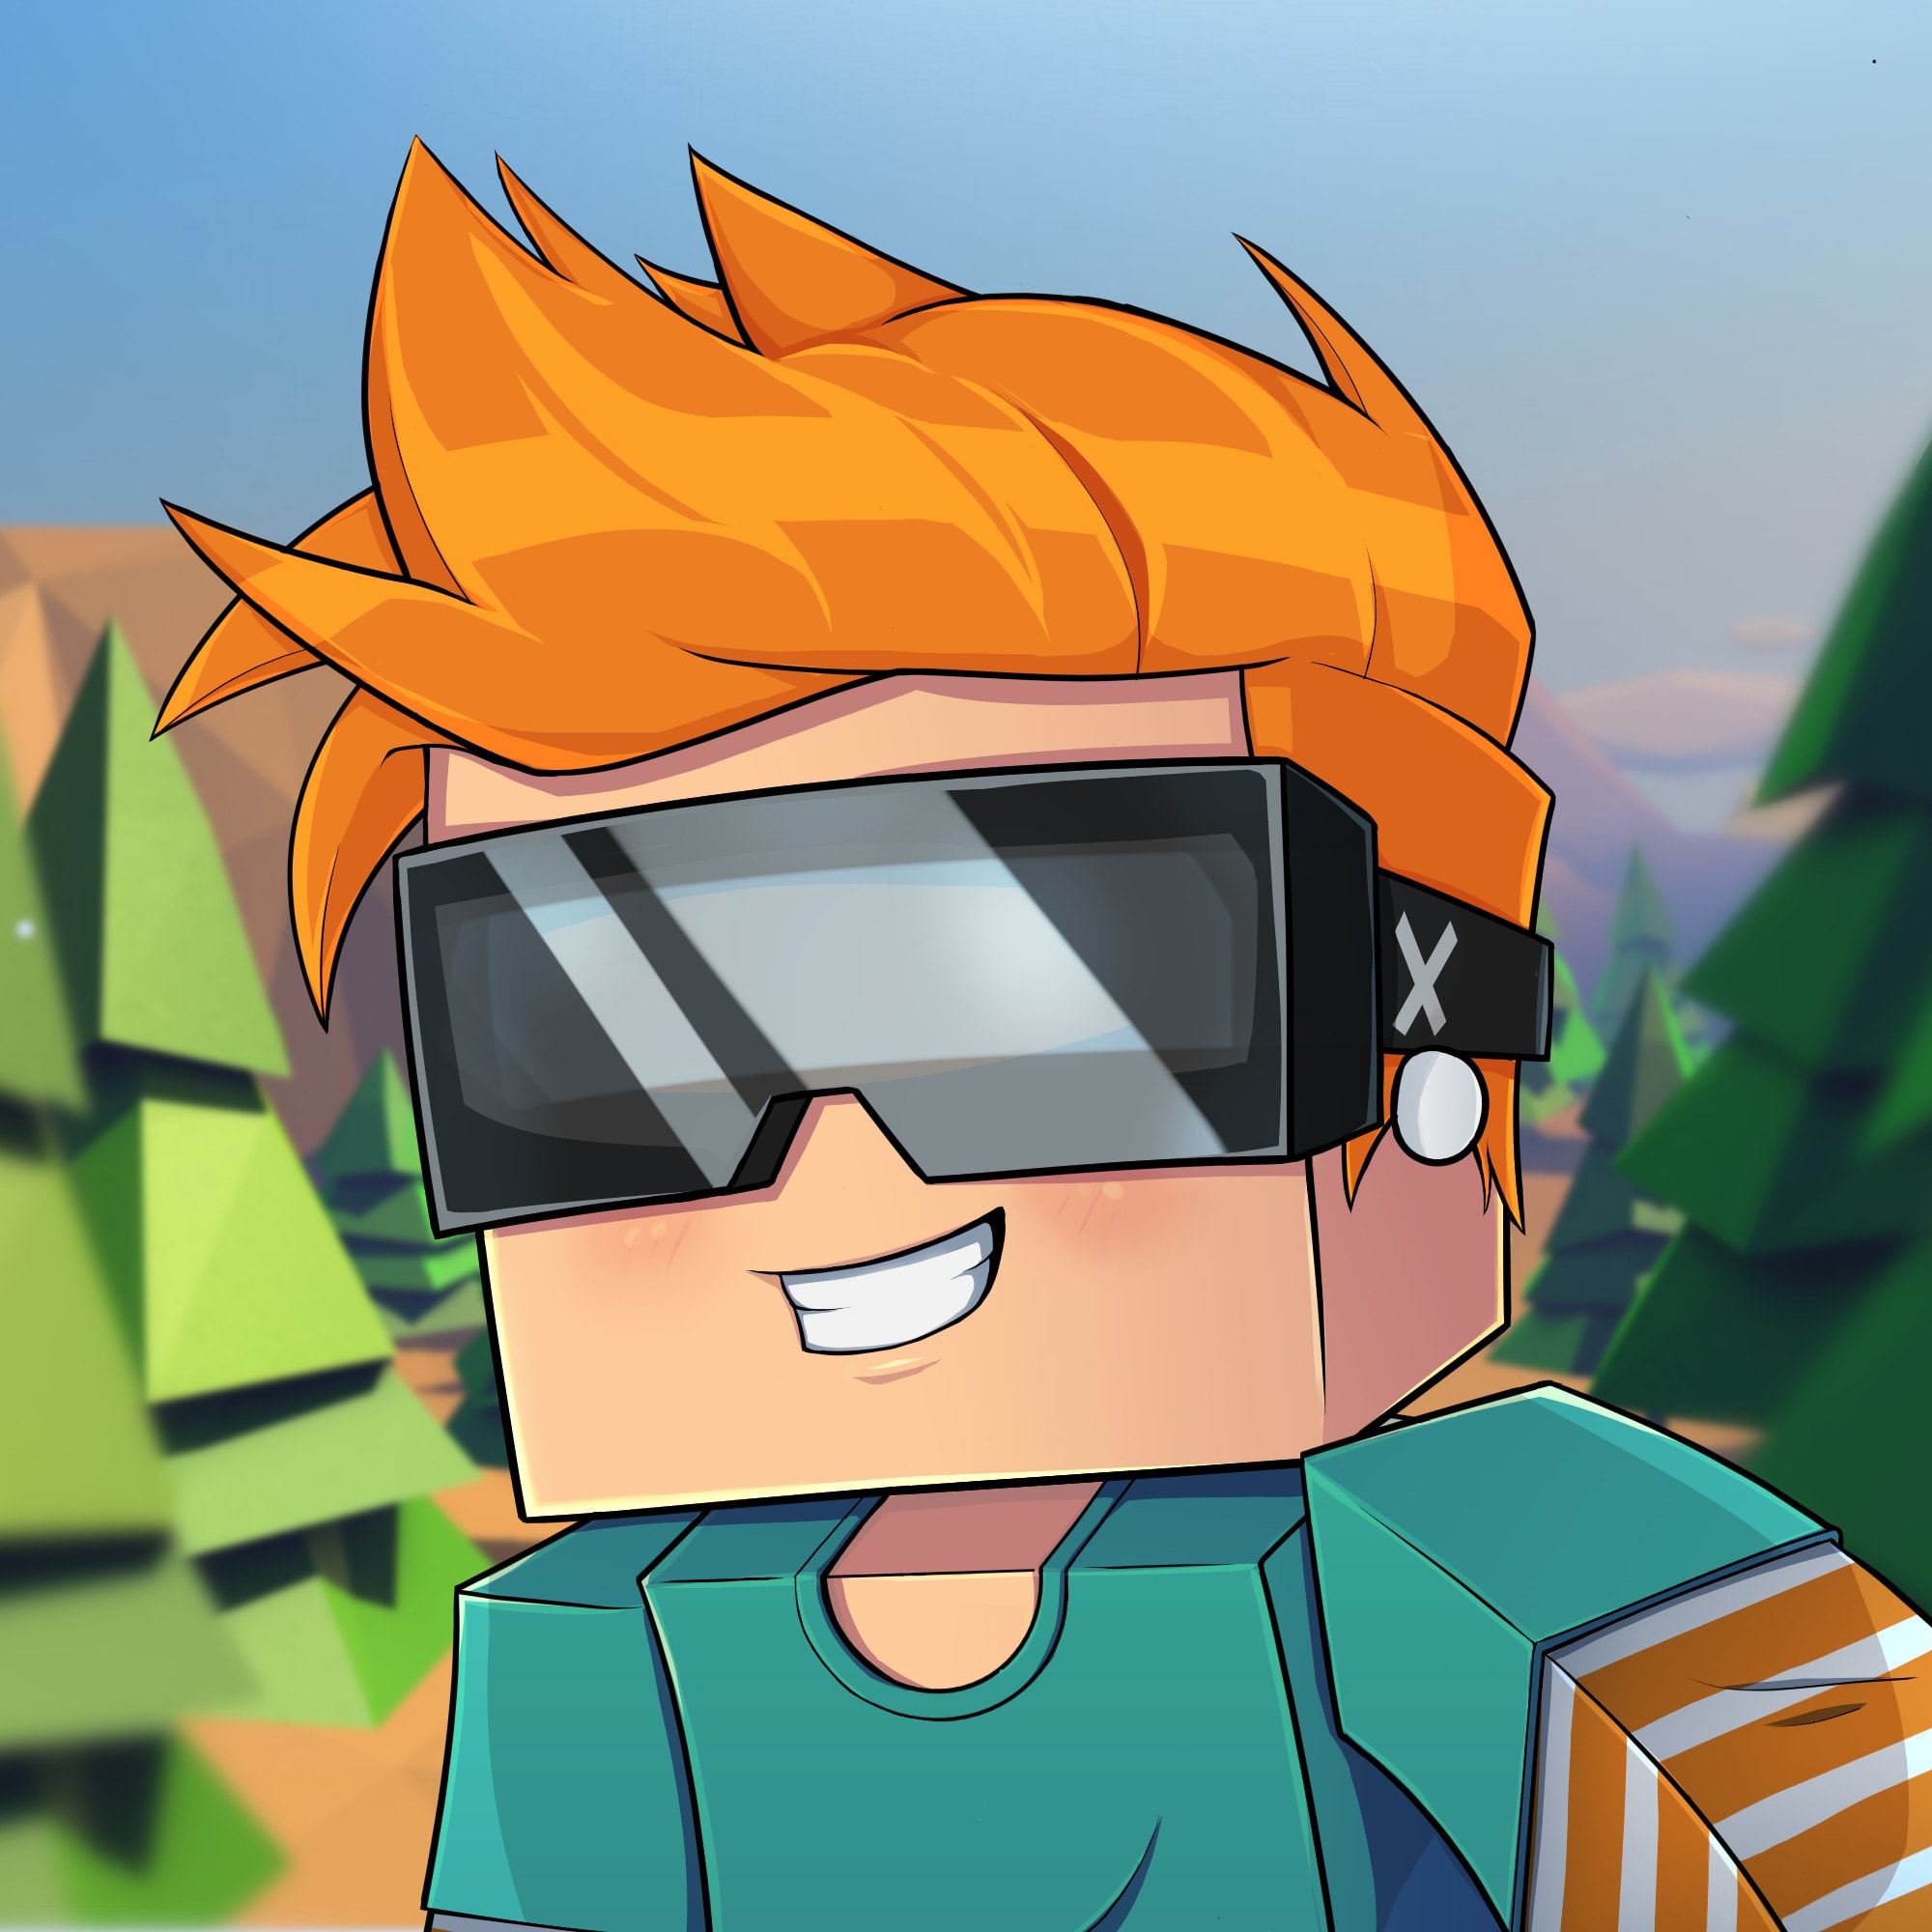 Draw Your Minecraft Or Roblox Character For A Cheap Price By Eeediejay - draw your minecraft or roblox character